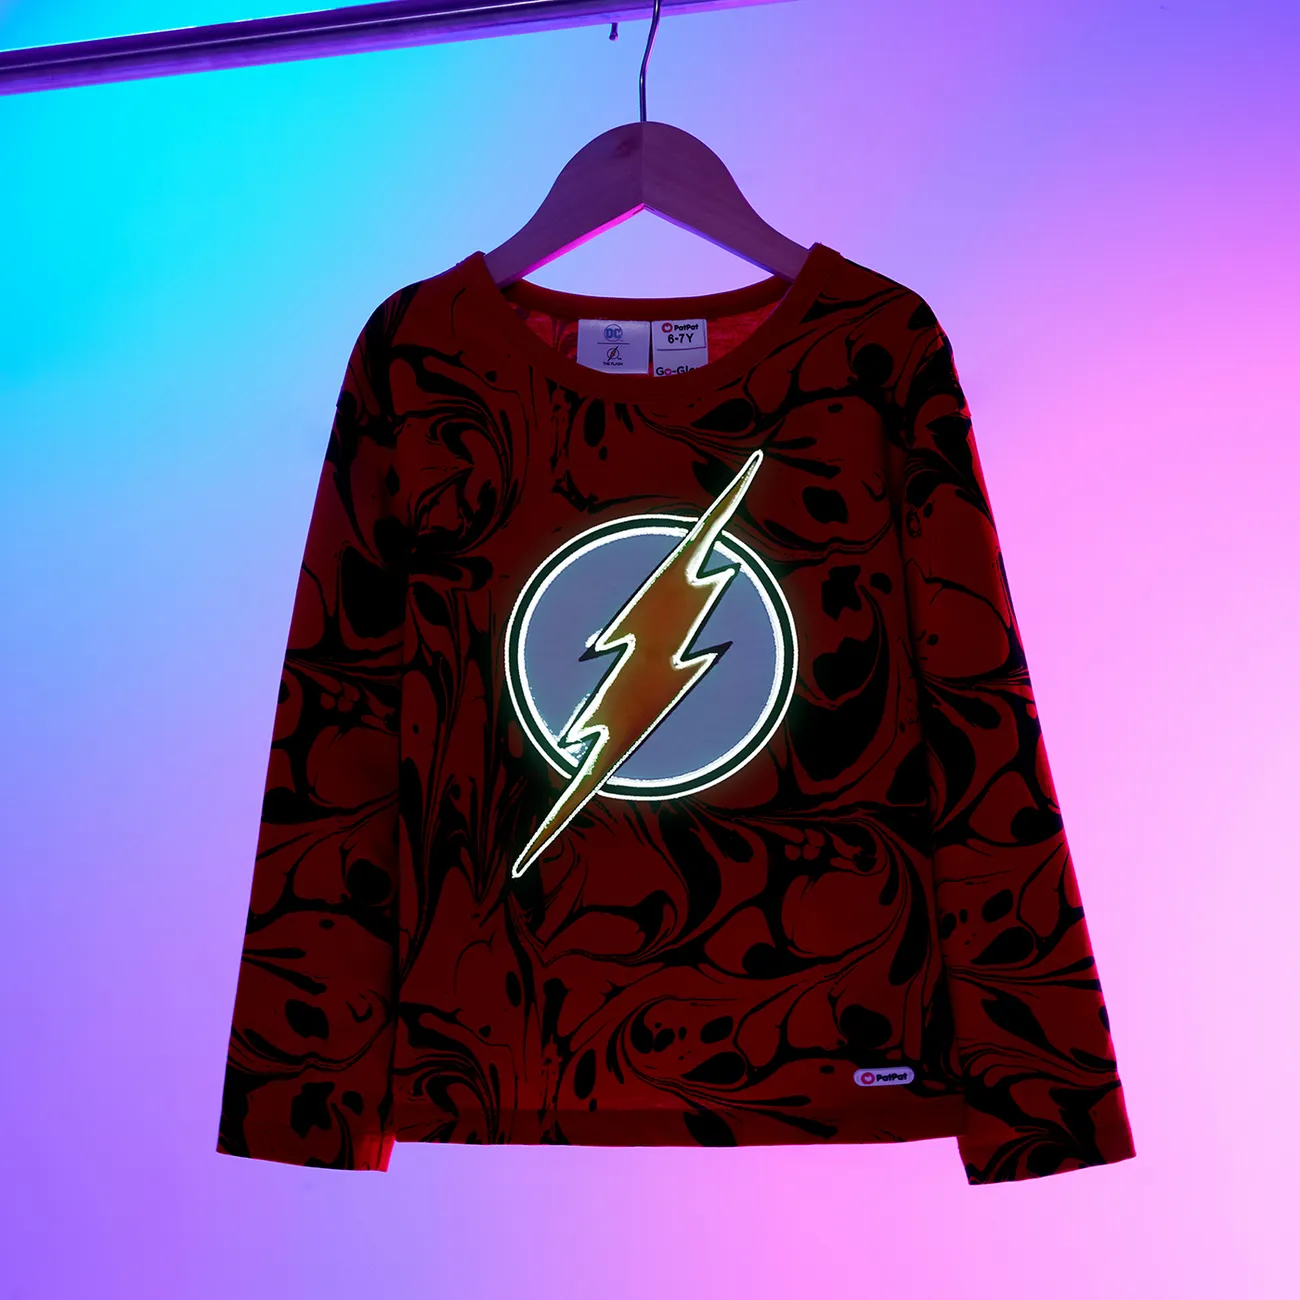 Go-Glow Leuchtend Rotes Sweatshirt mit Light Up The Flash-Muster rot big image 1